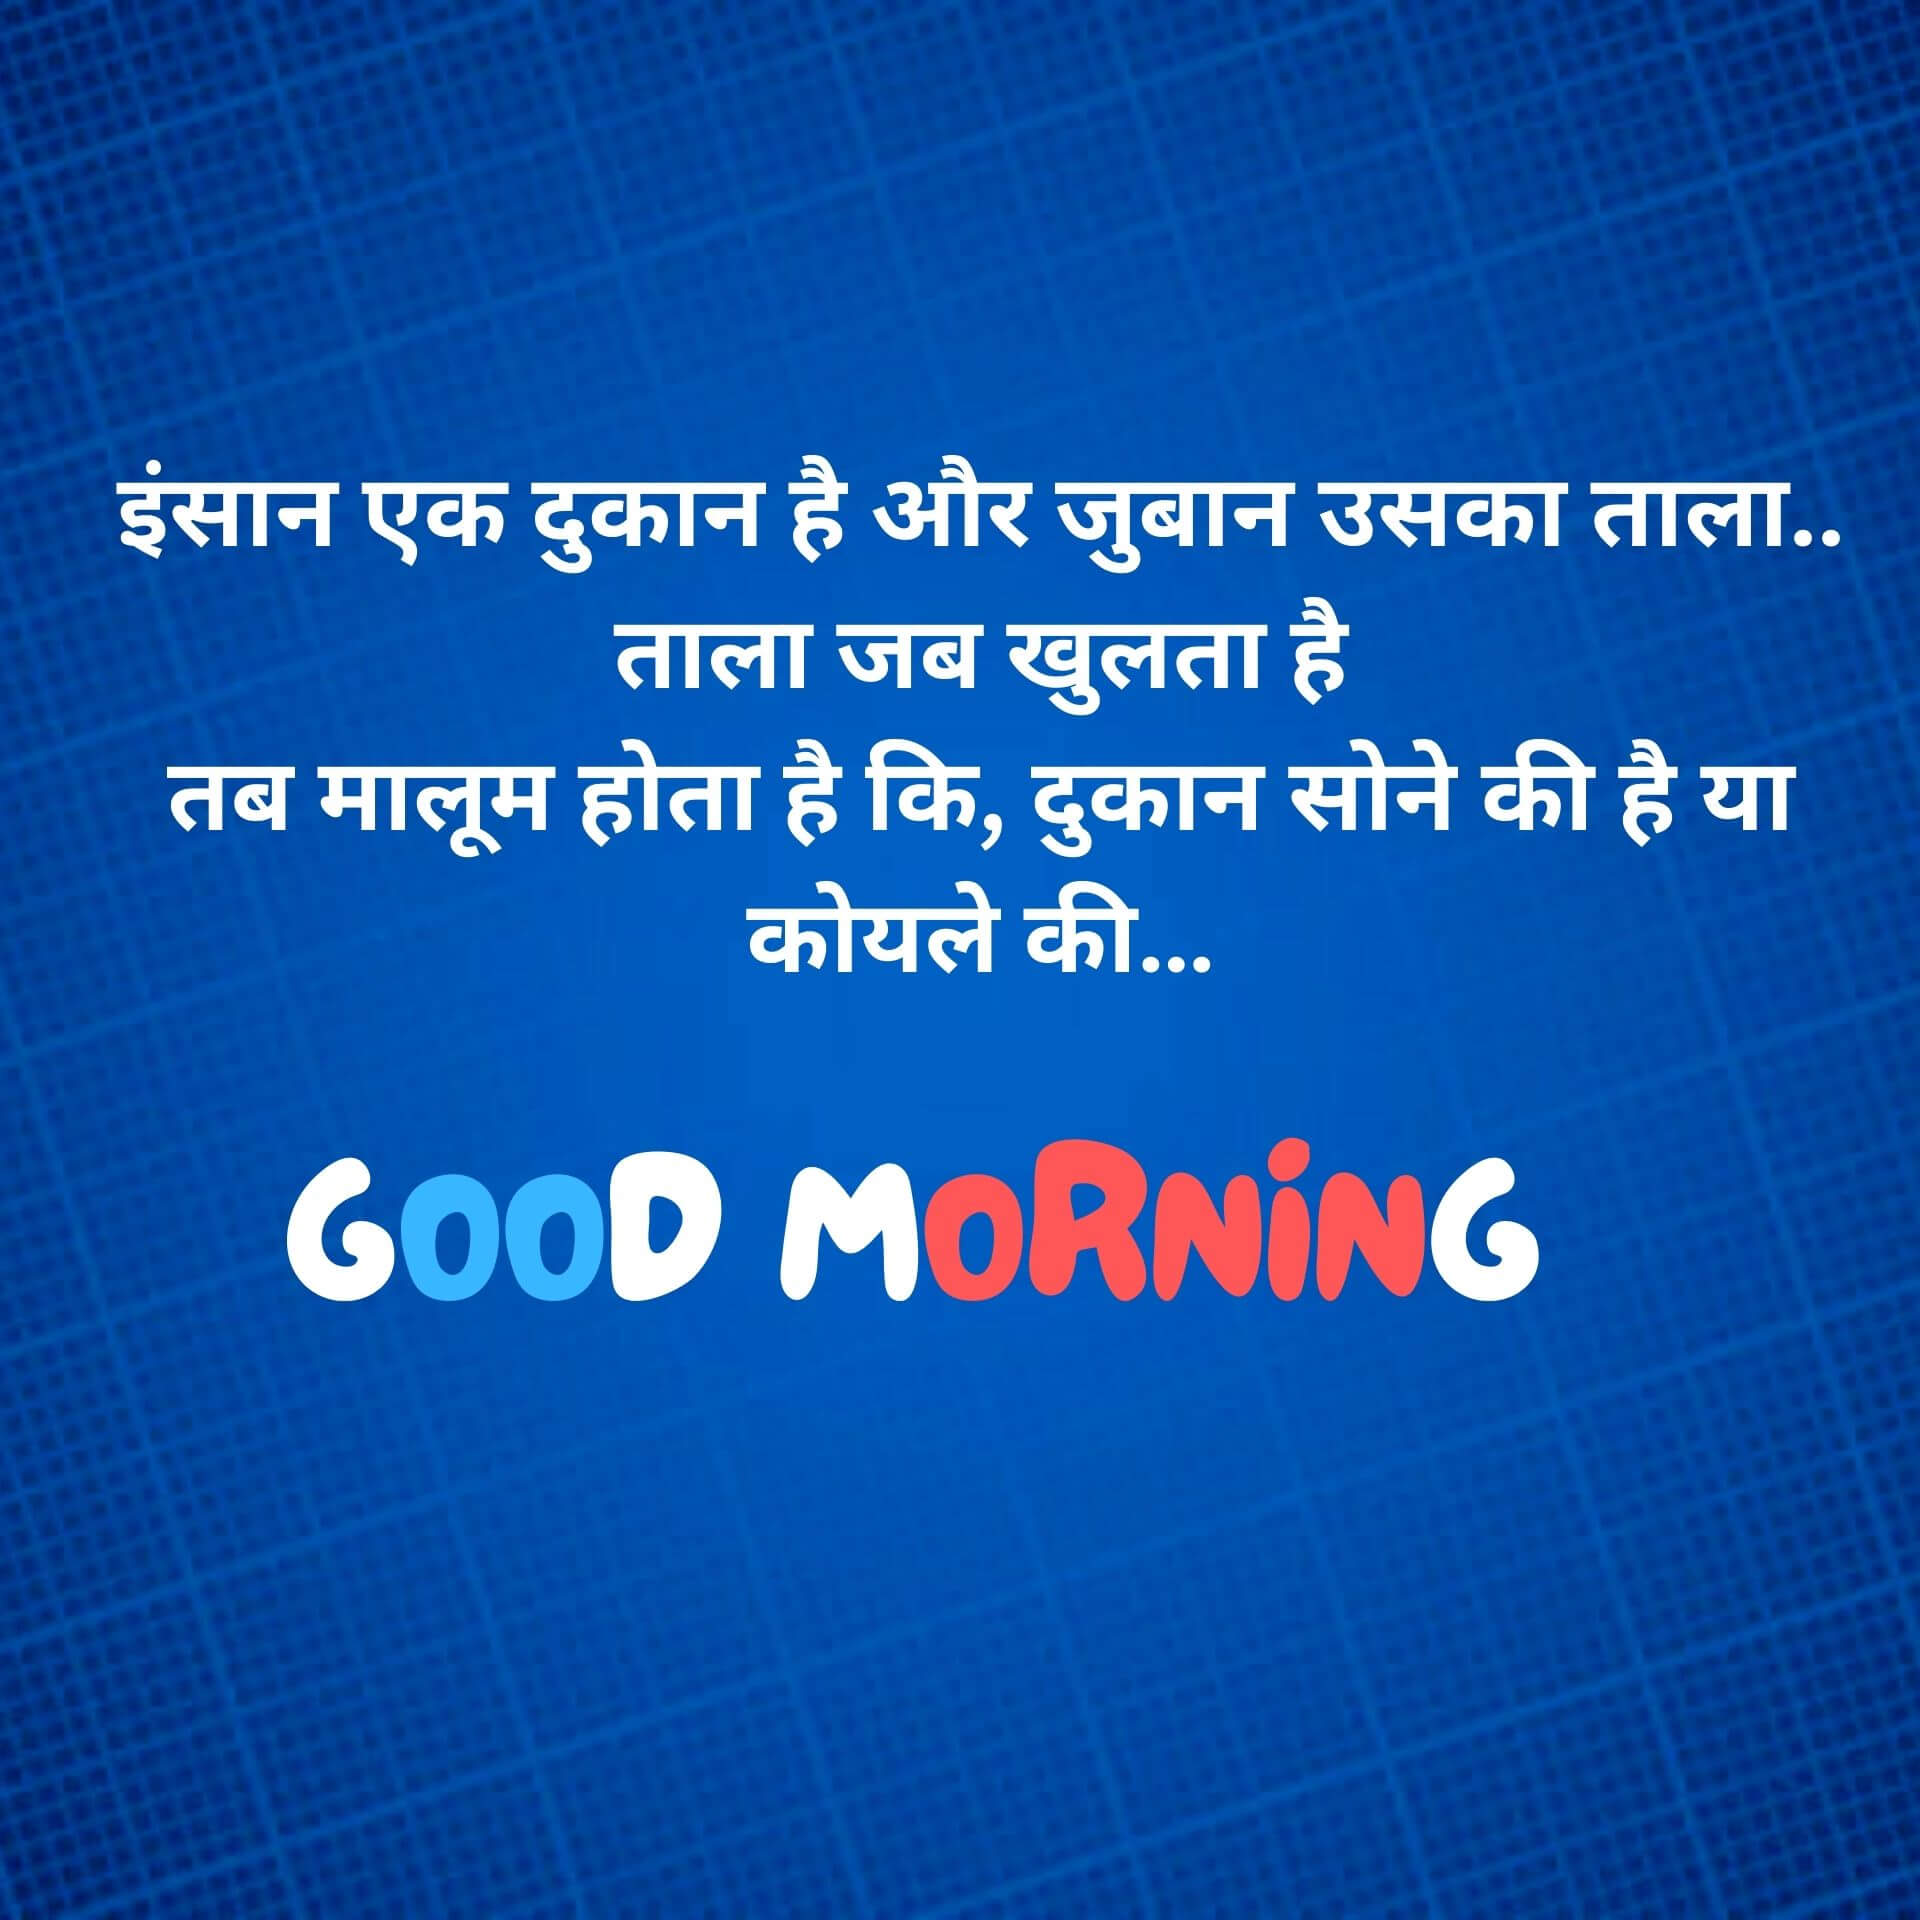 Good Morning Wallpaper With Hindi Quotes for Whatsapp